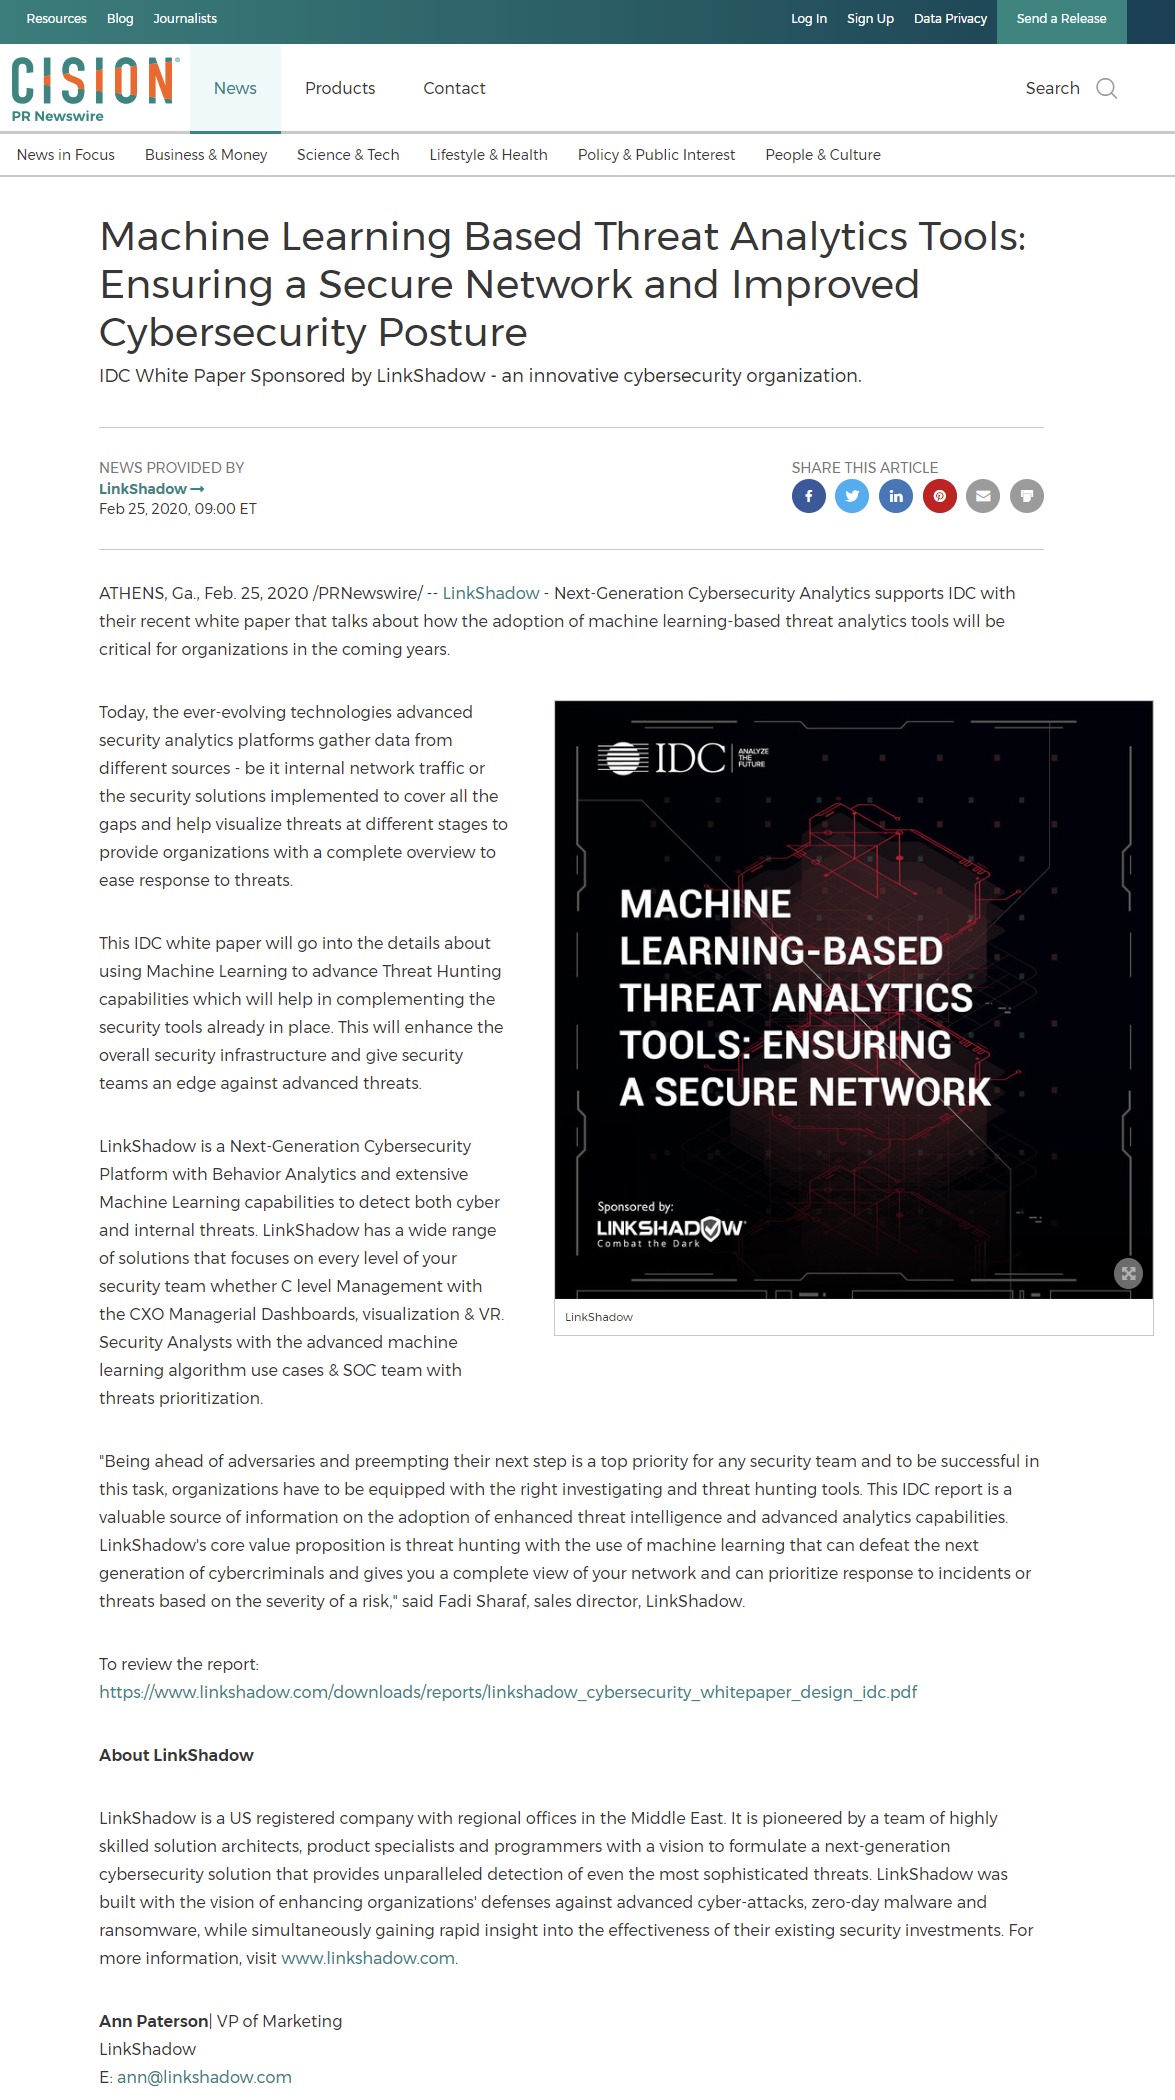 IDC White Paper Sponsored by LinkShadow: Machine Learning Based Threat Analytics Tools